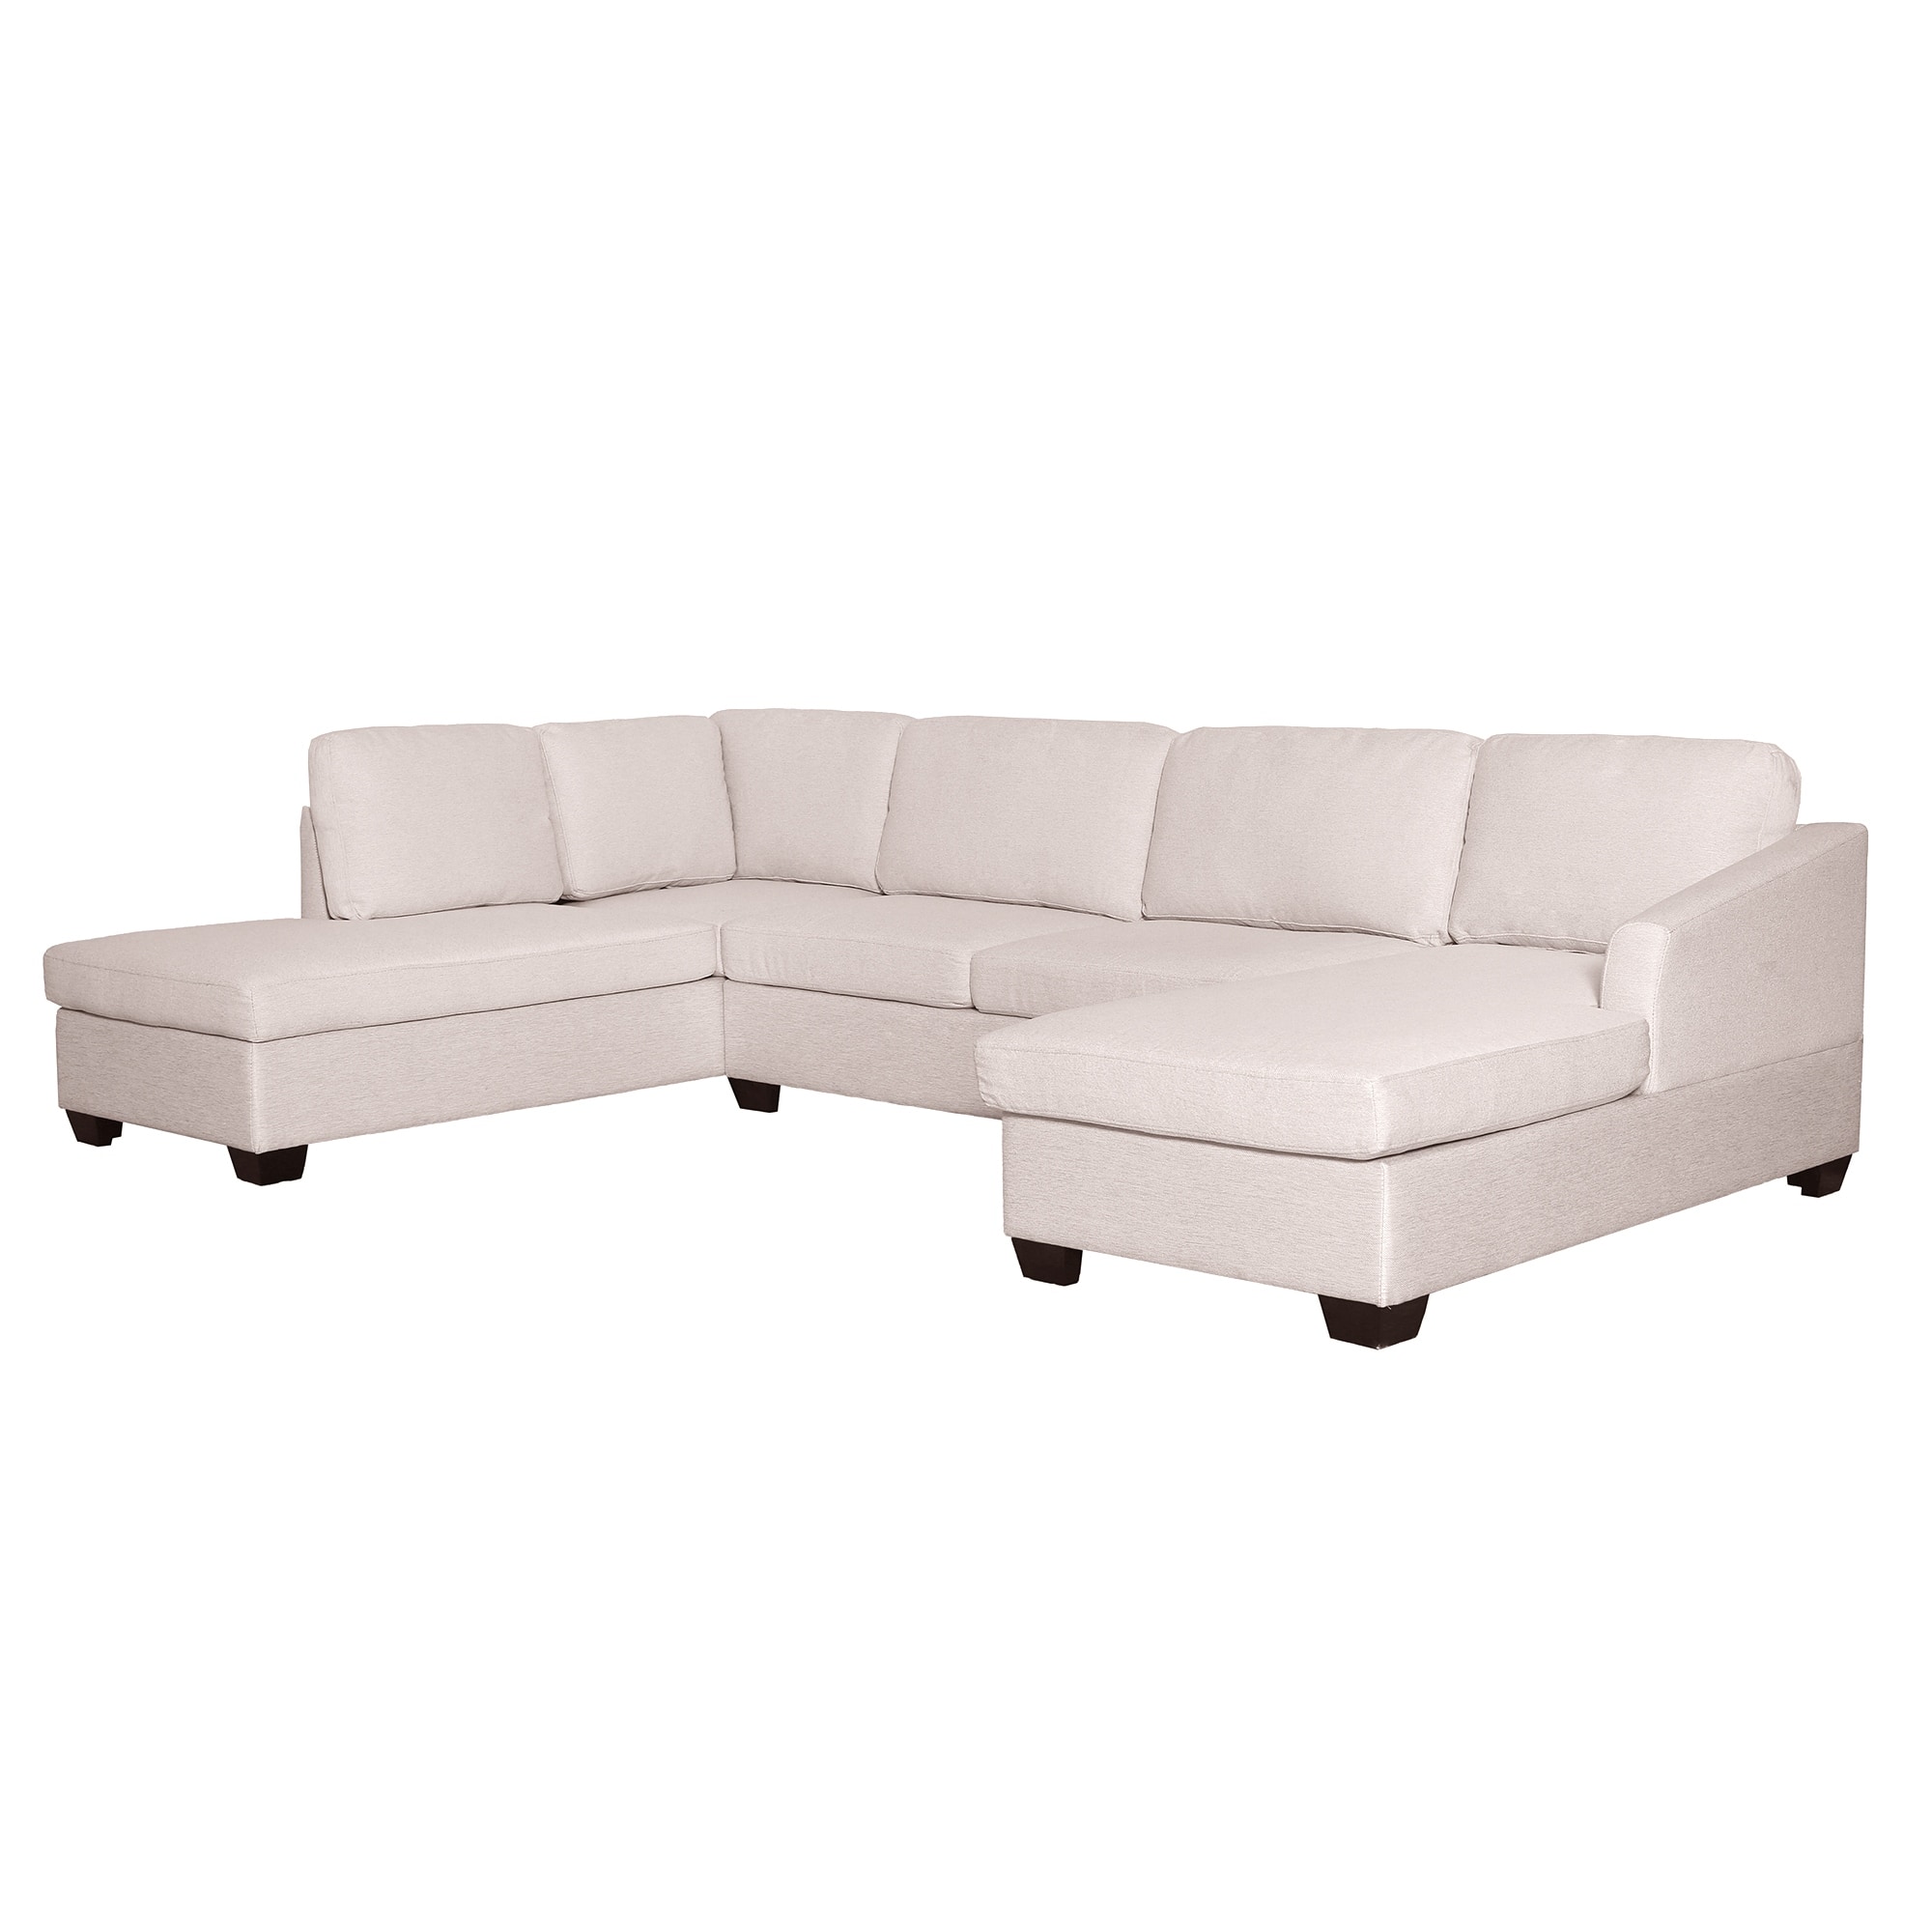 Large U-Shape Sectional Sofa, Double Extra Wide Chaise Lounge Couch ...